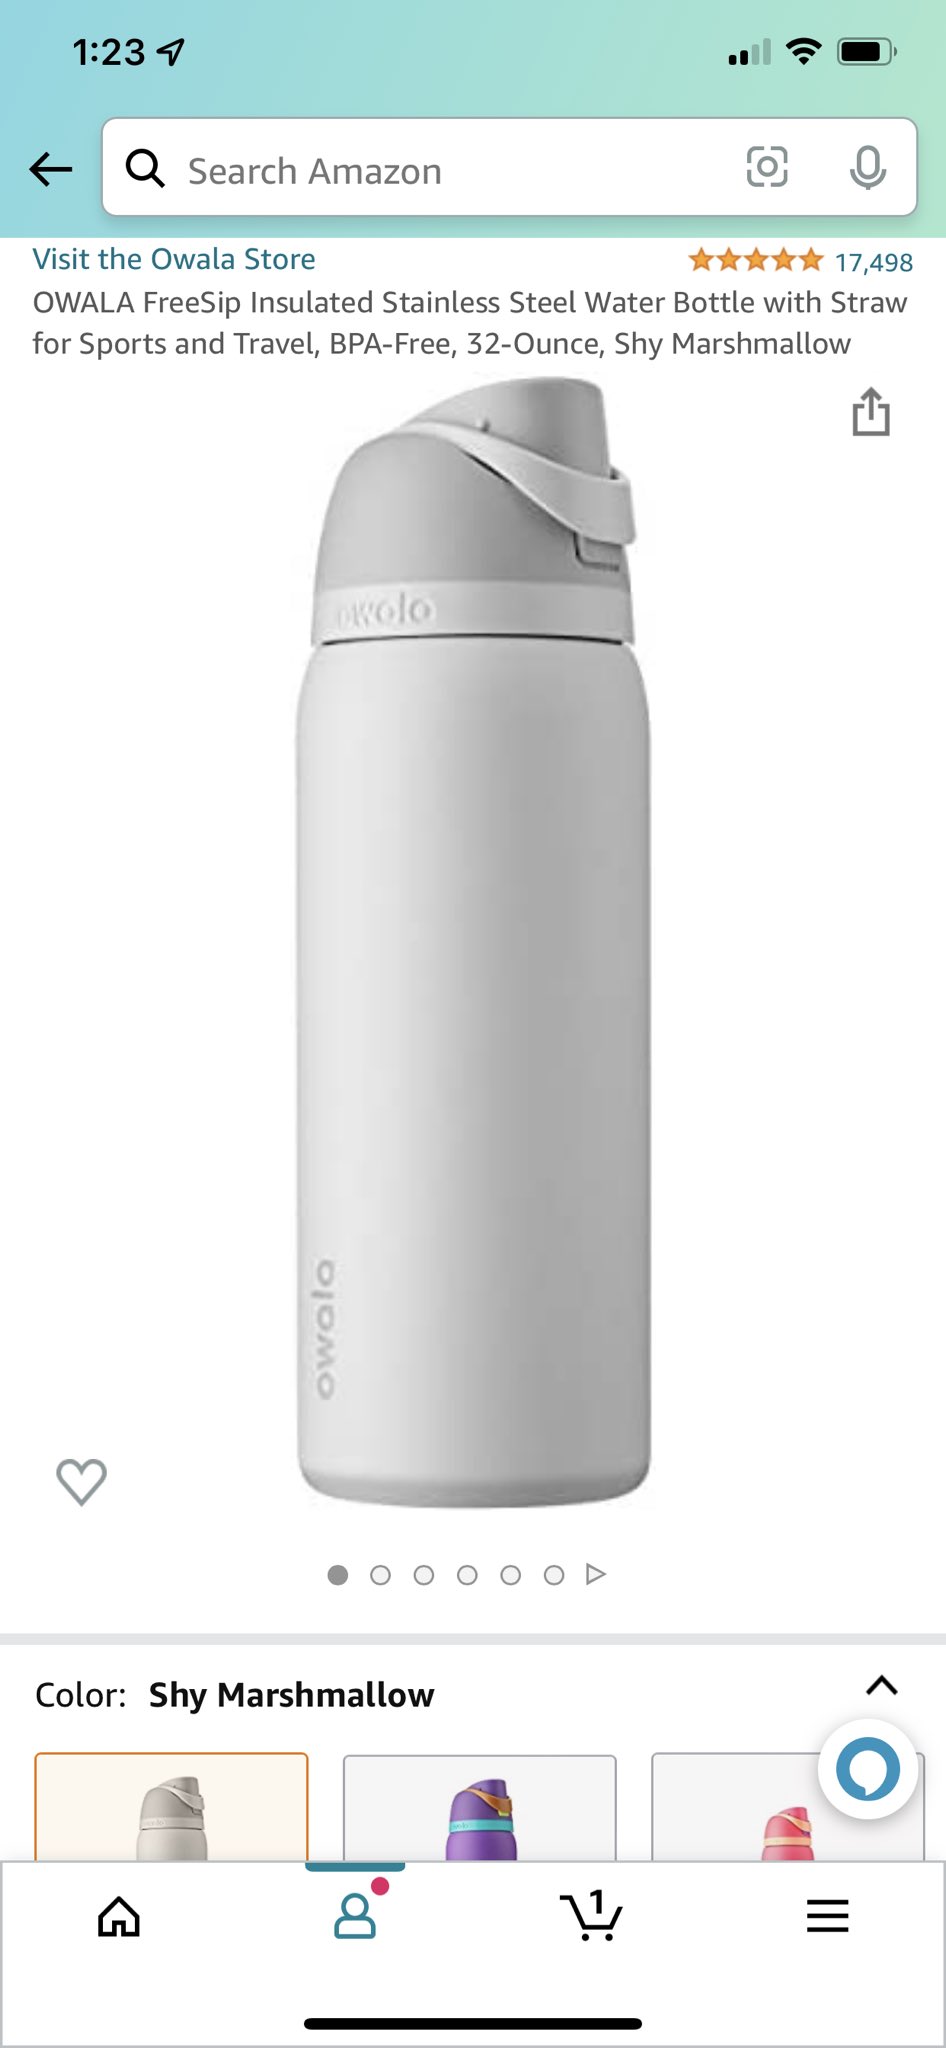 Owala FreeSip Insulated Stainless Steel Water Bottle, 32-oz, Shy  Marshmallow & FreeSip Insulated Stainless Steel Water Bottle with Straw for  Sports